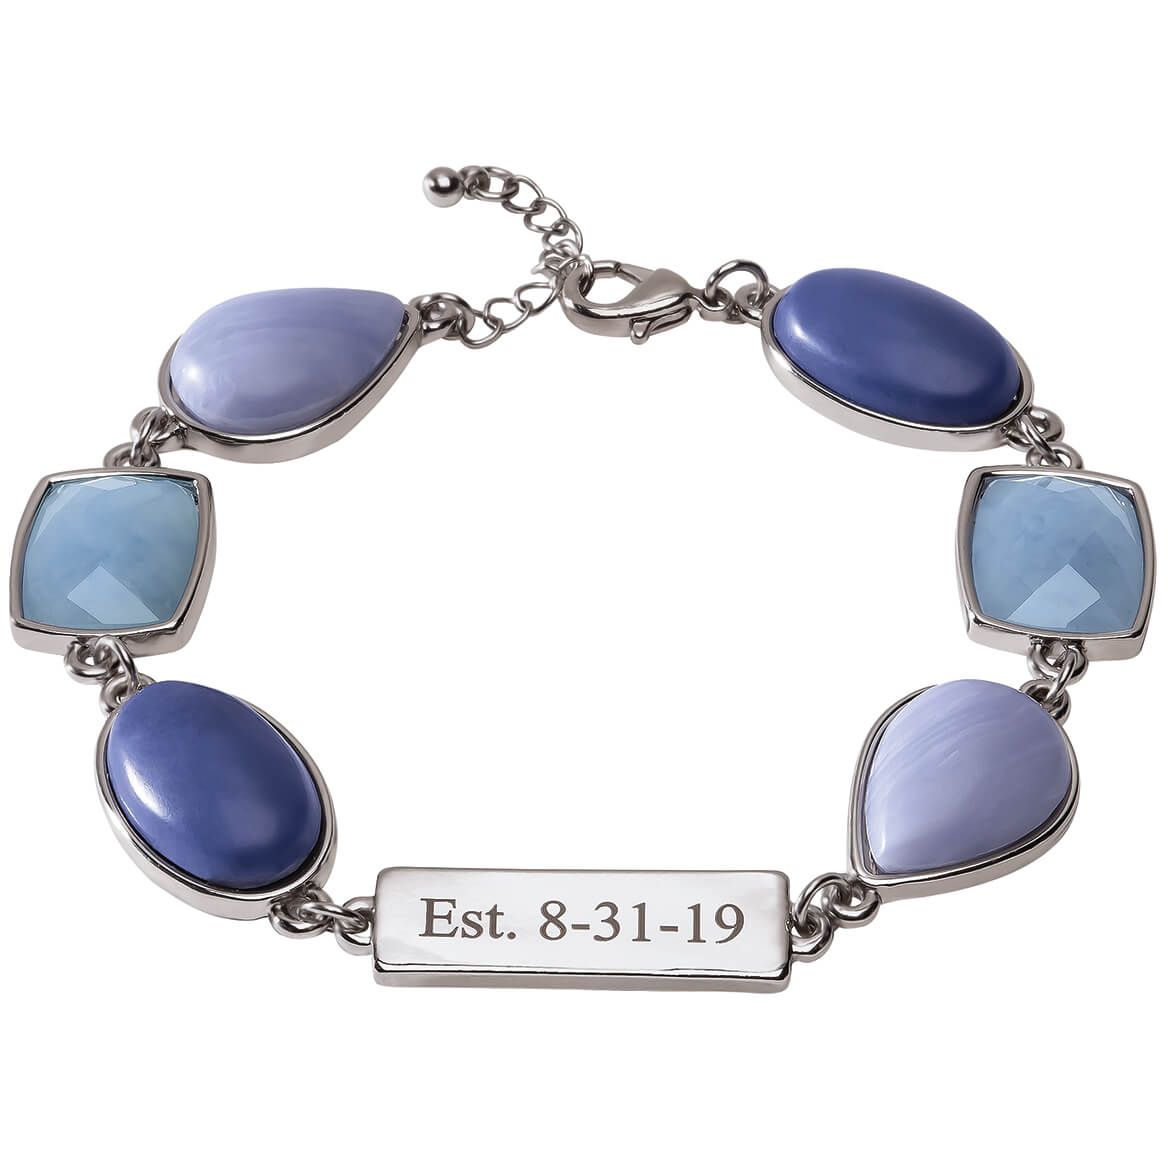 Personalized Blue Stone and Lace Agate Bracelet + '-' + 369352